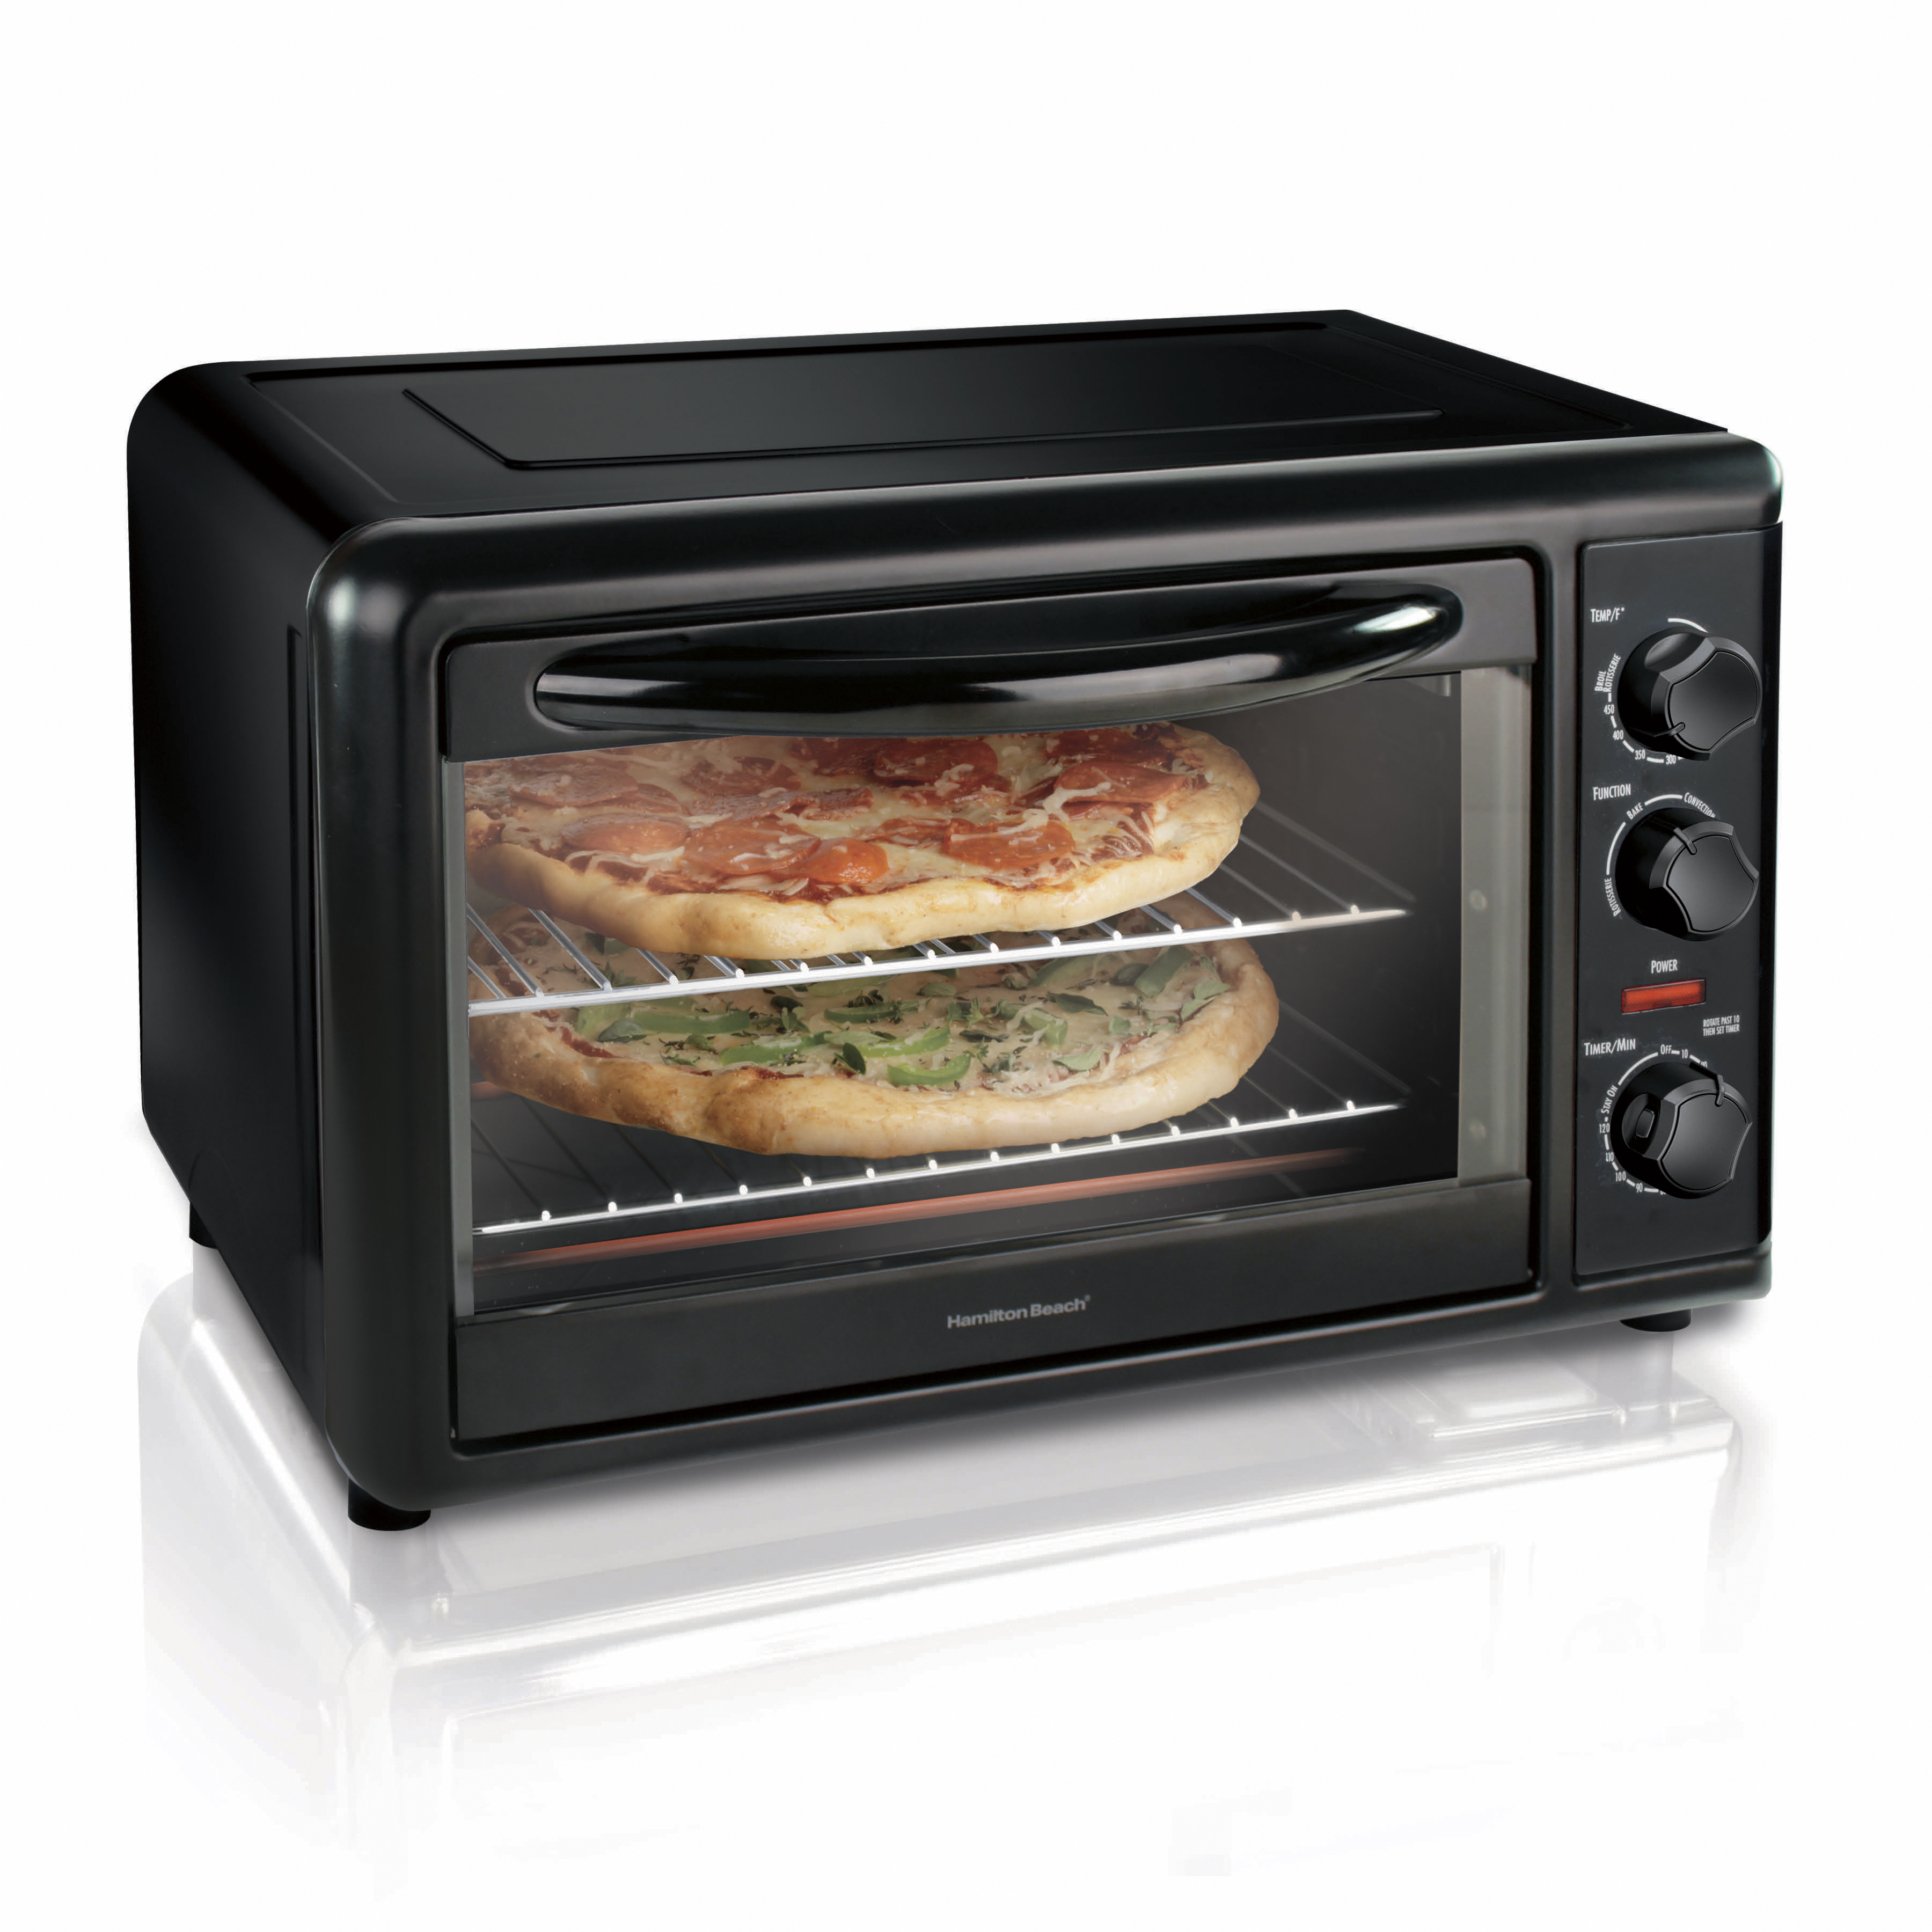 Hamilton Beach Countertop Oven with Convection & Rotisserie, 1,500 Watts, Black, 31101D - image 1 of 8